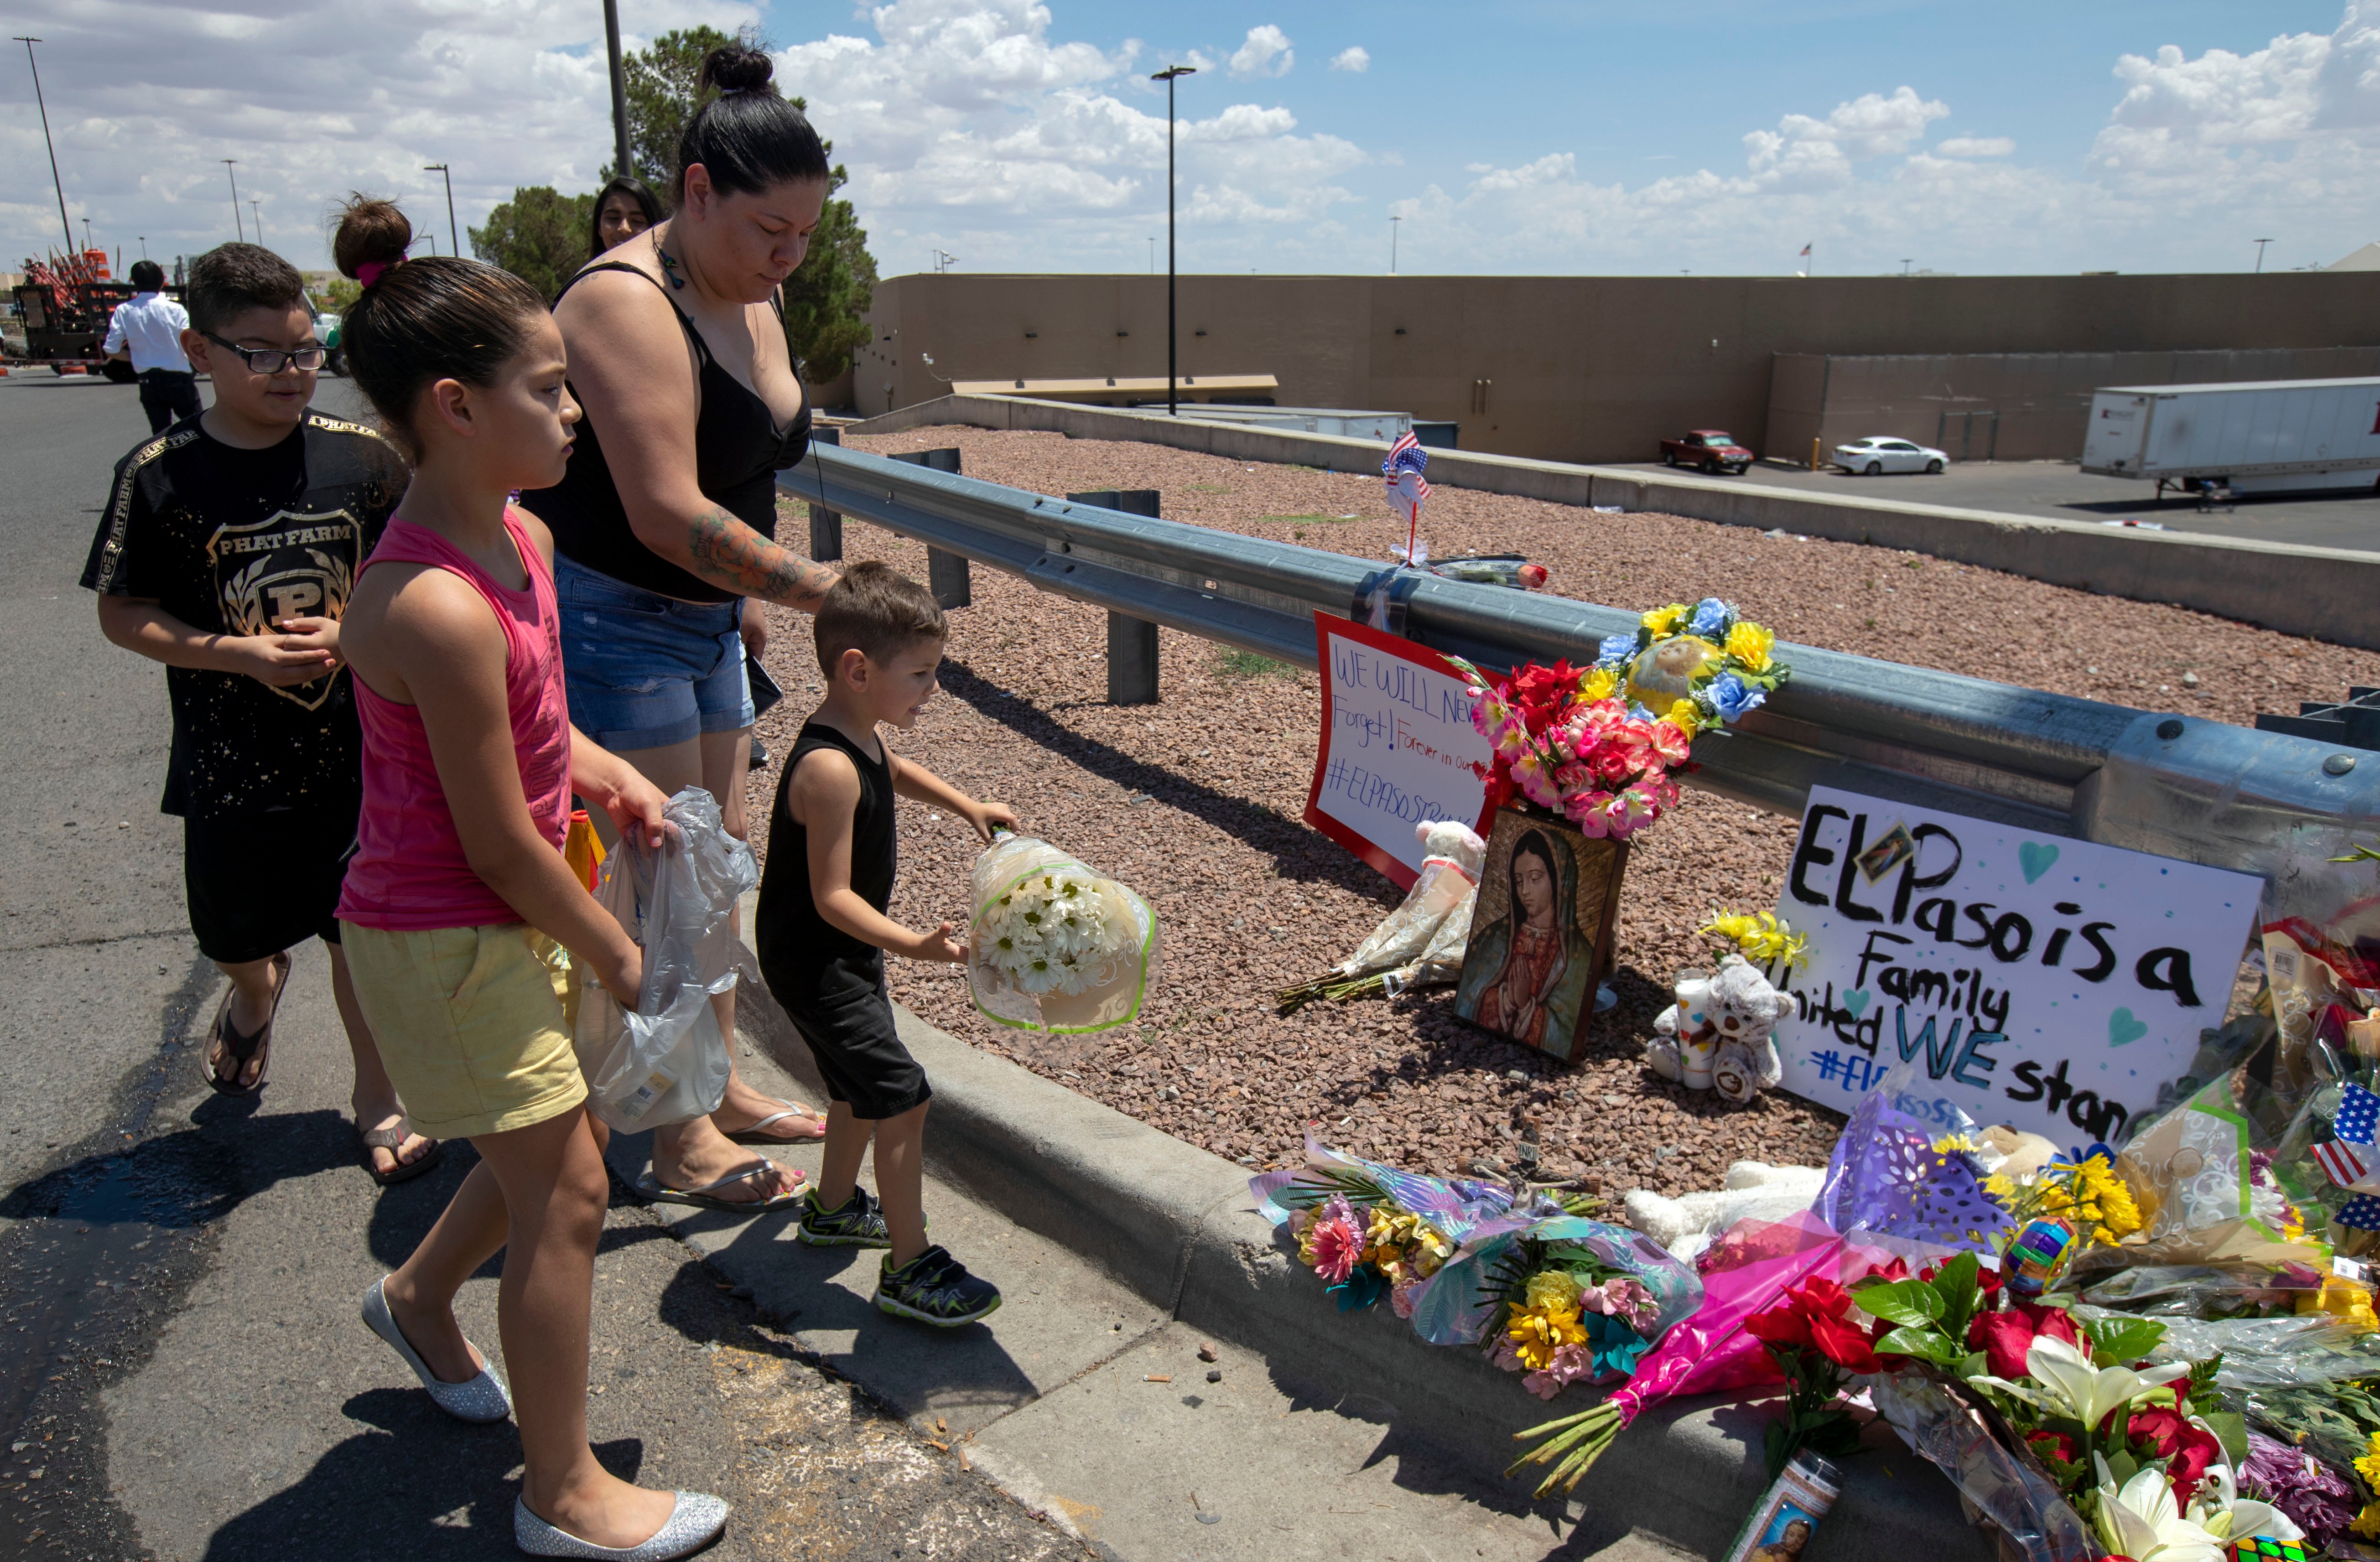 An El Paso family bring flowers to the makeshift memorial for the victims of the mass shooting in El Paso